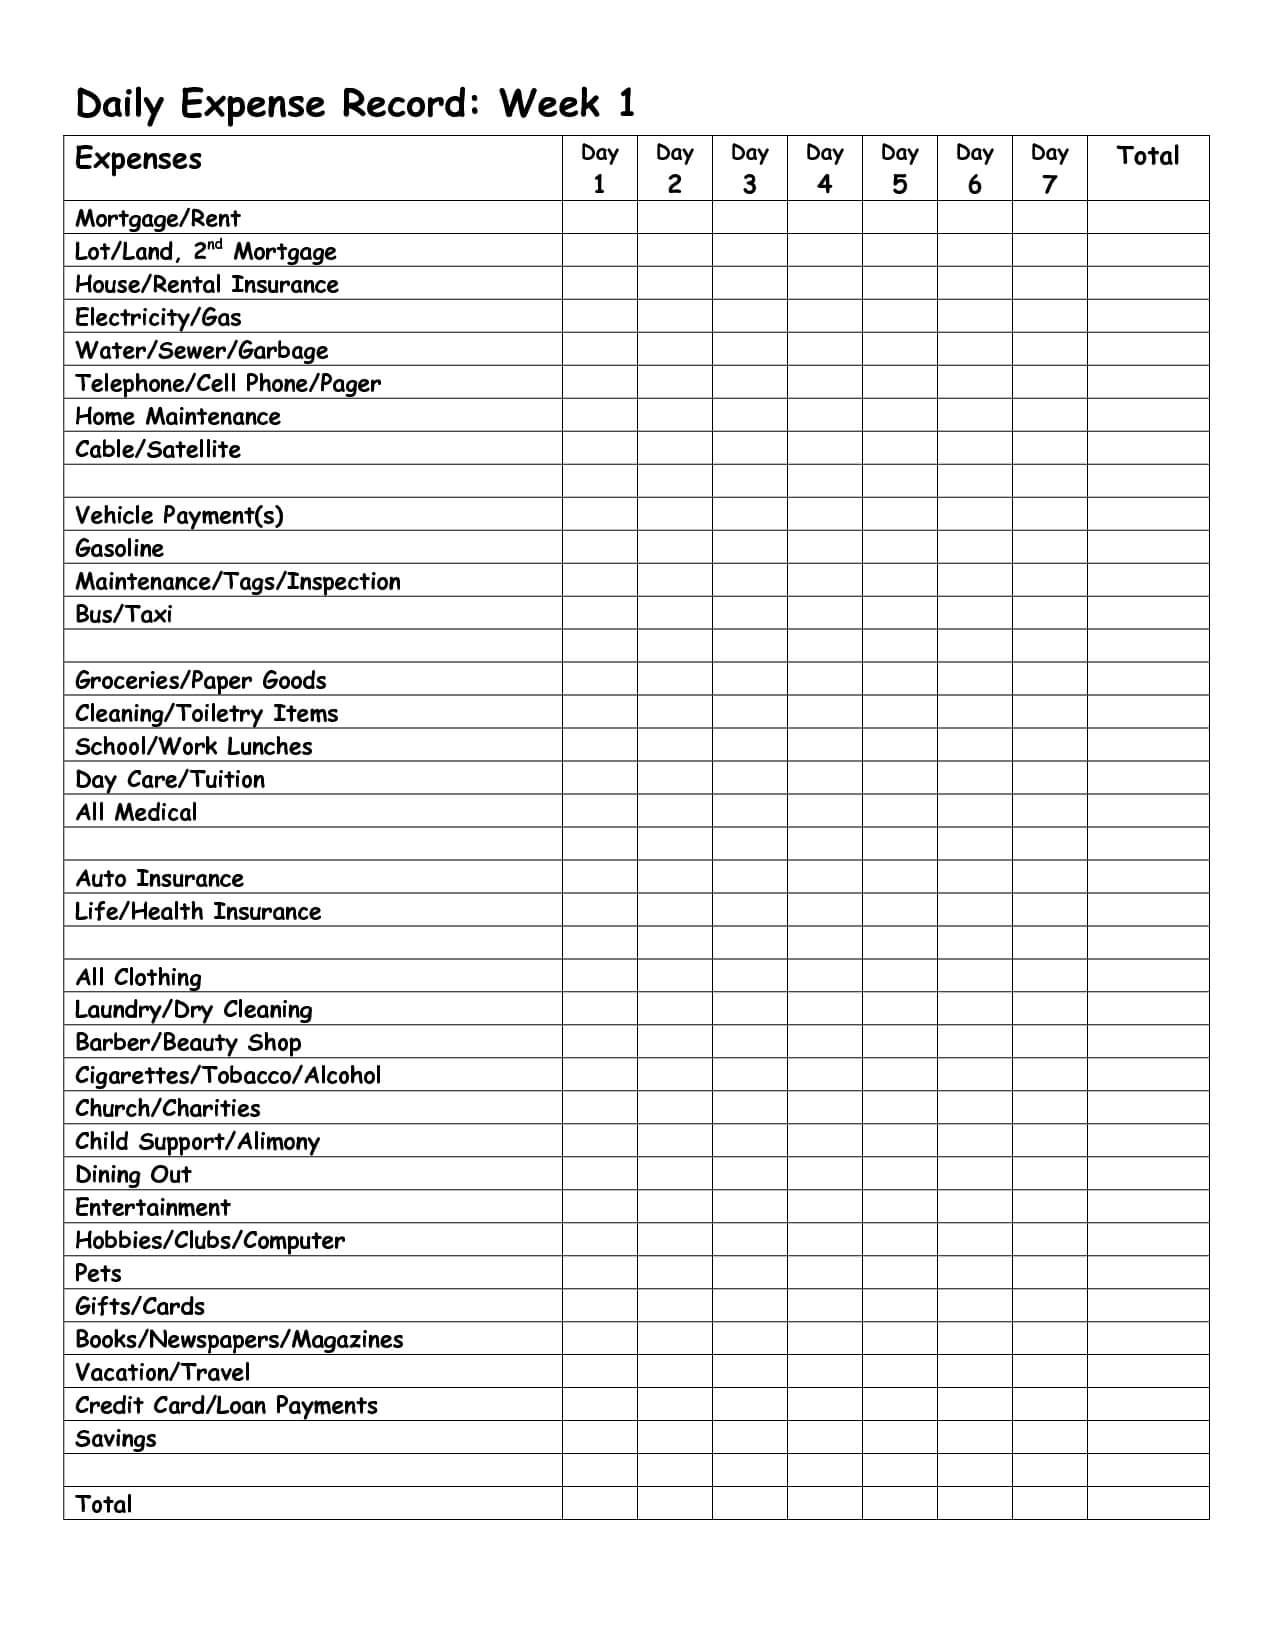 Monthly Expense Report Template | Daily Expense Record Week In Gas Mileage Expense Report Template